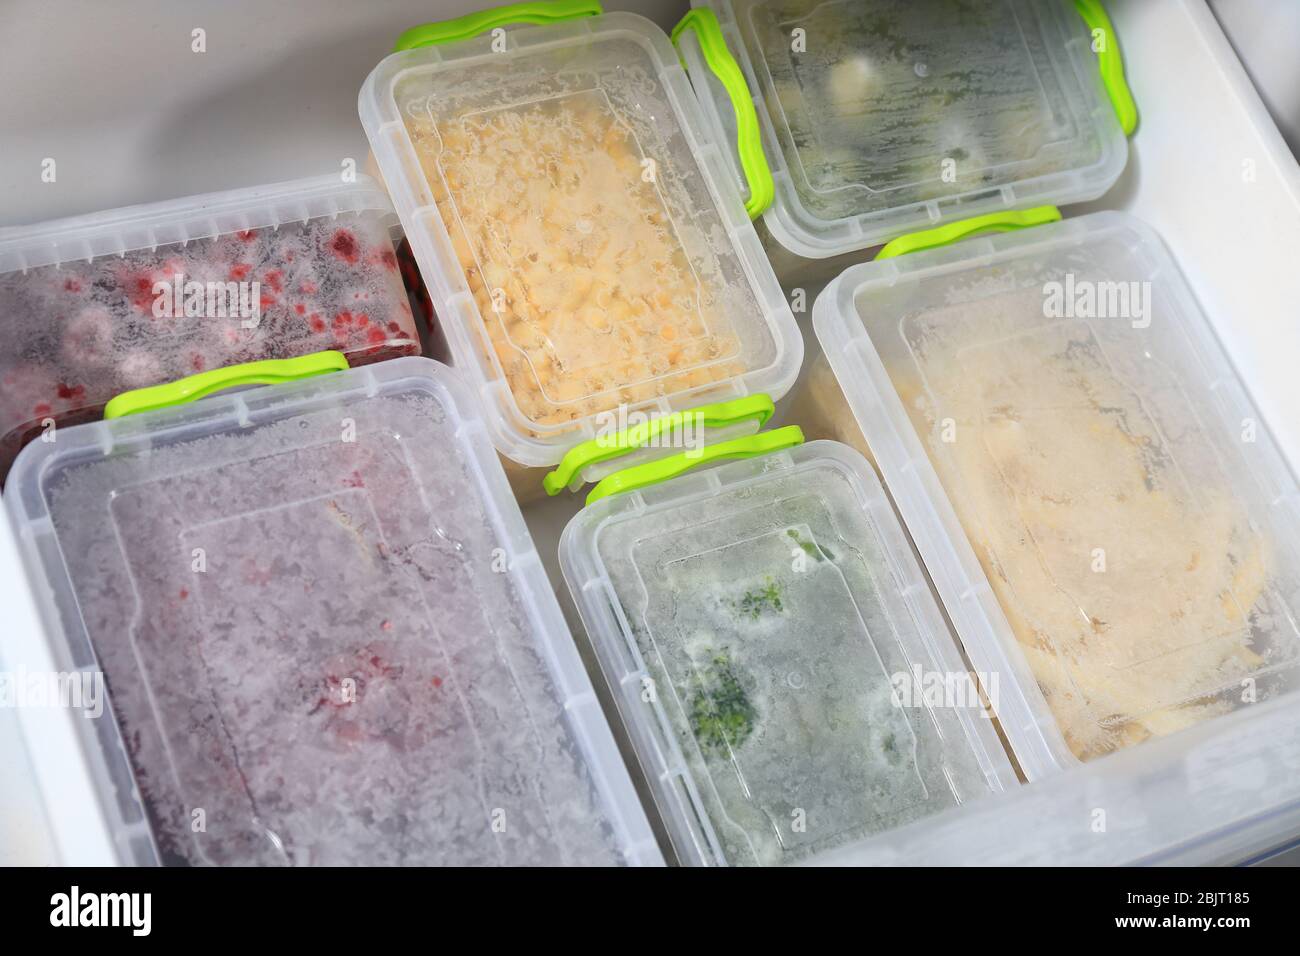 Containers with different food in refrigerator Stock Photo